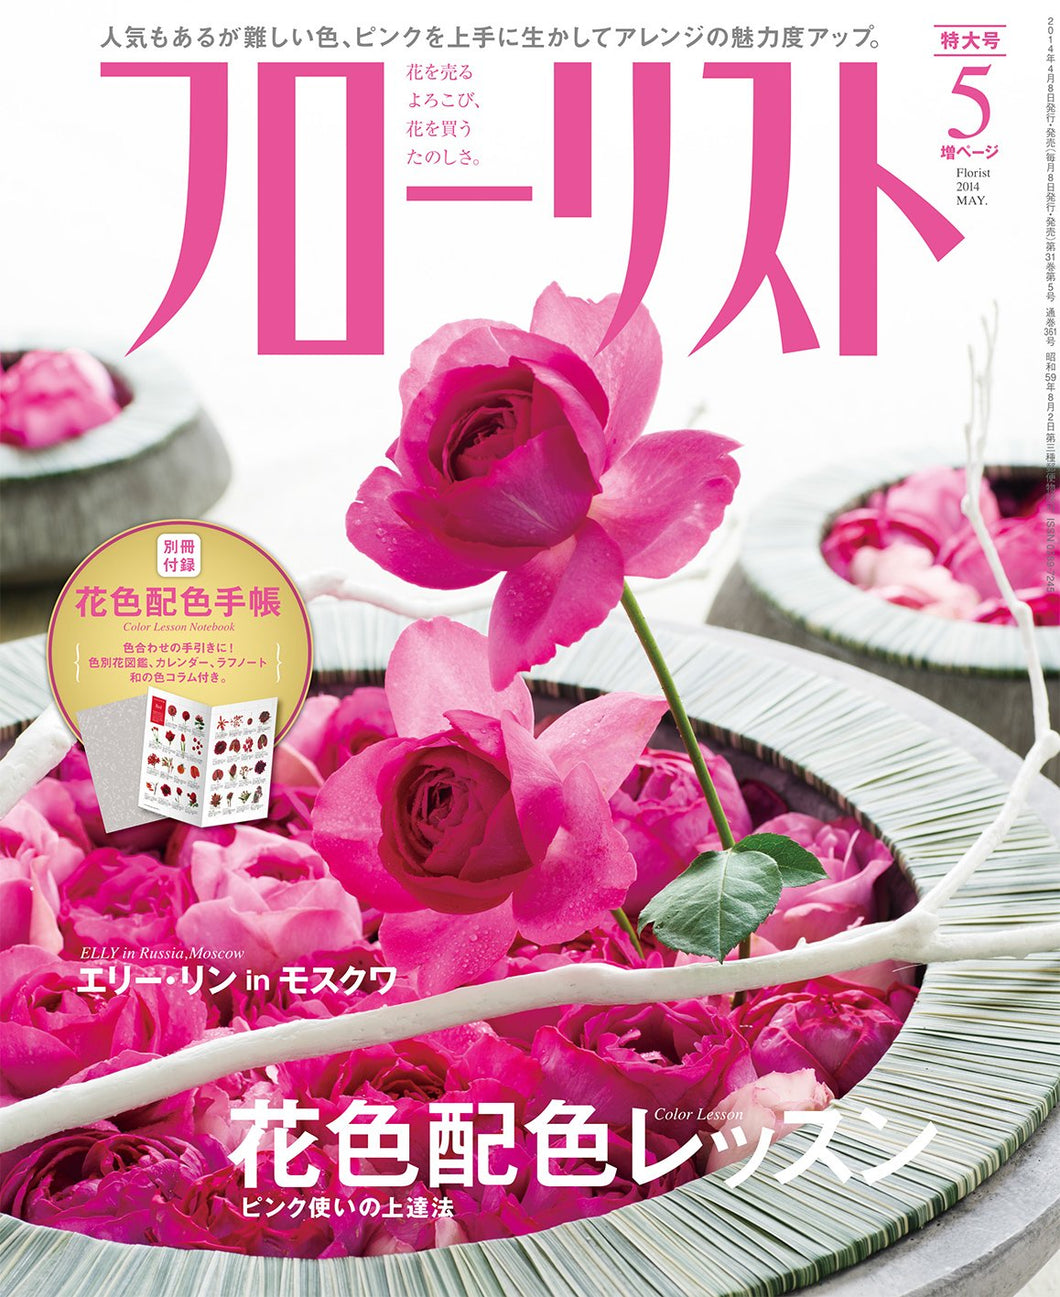 Florist May 2014 <Extra-large issue with appendix>